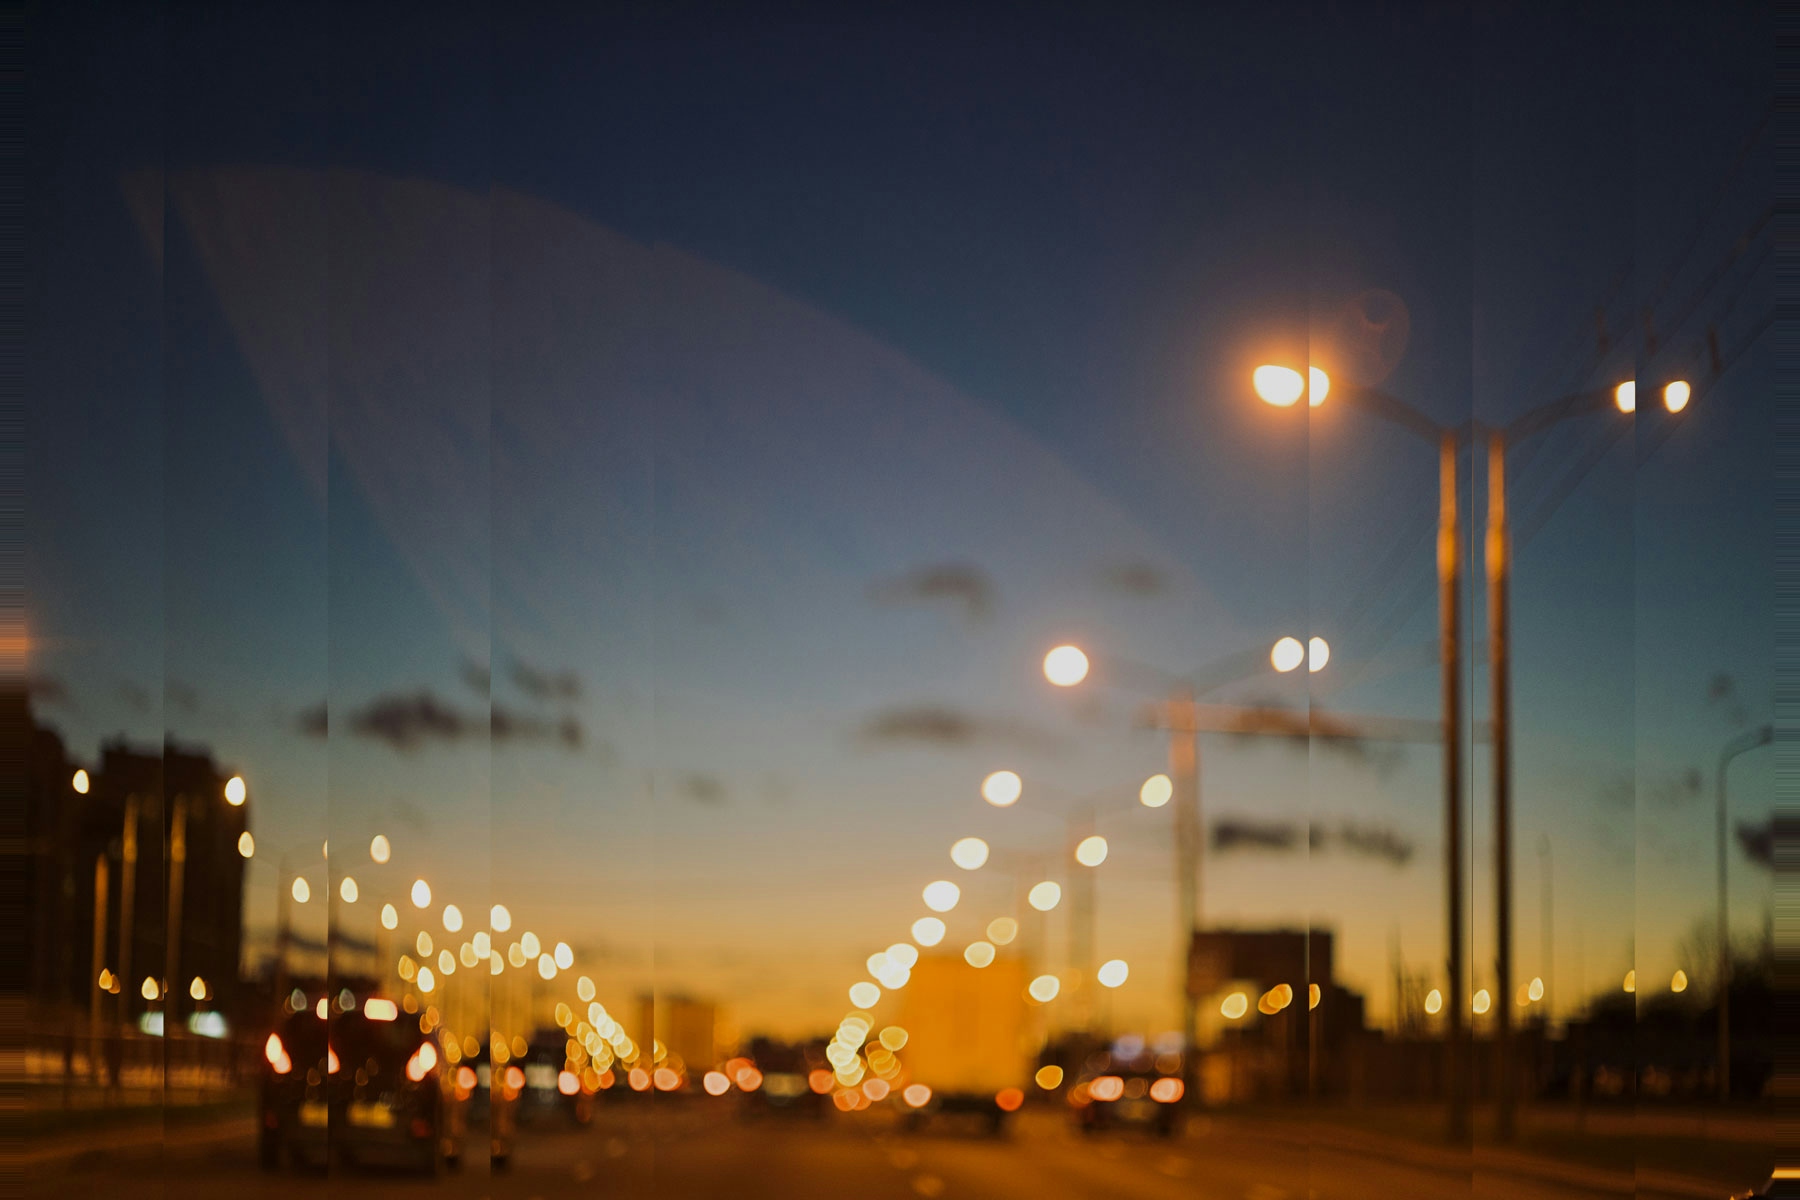 Streetlights light up the highway for logistics providers driving into a city at twilight.